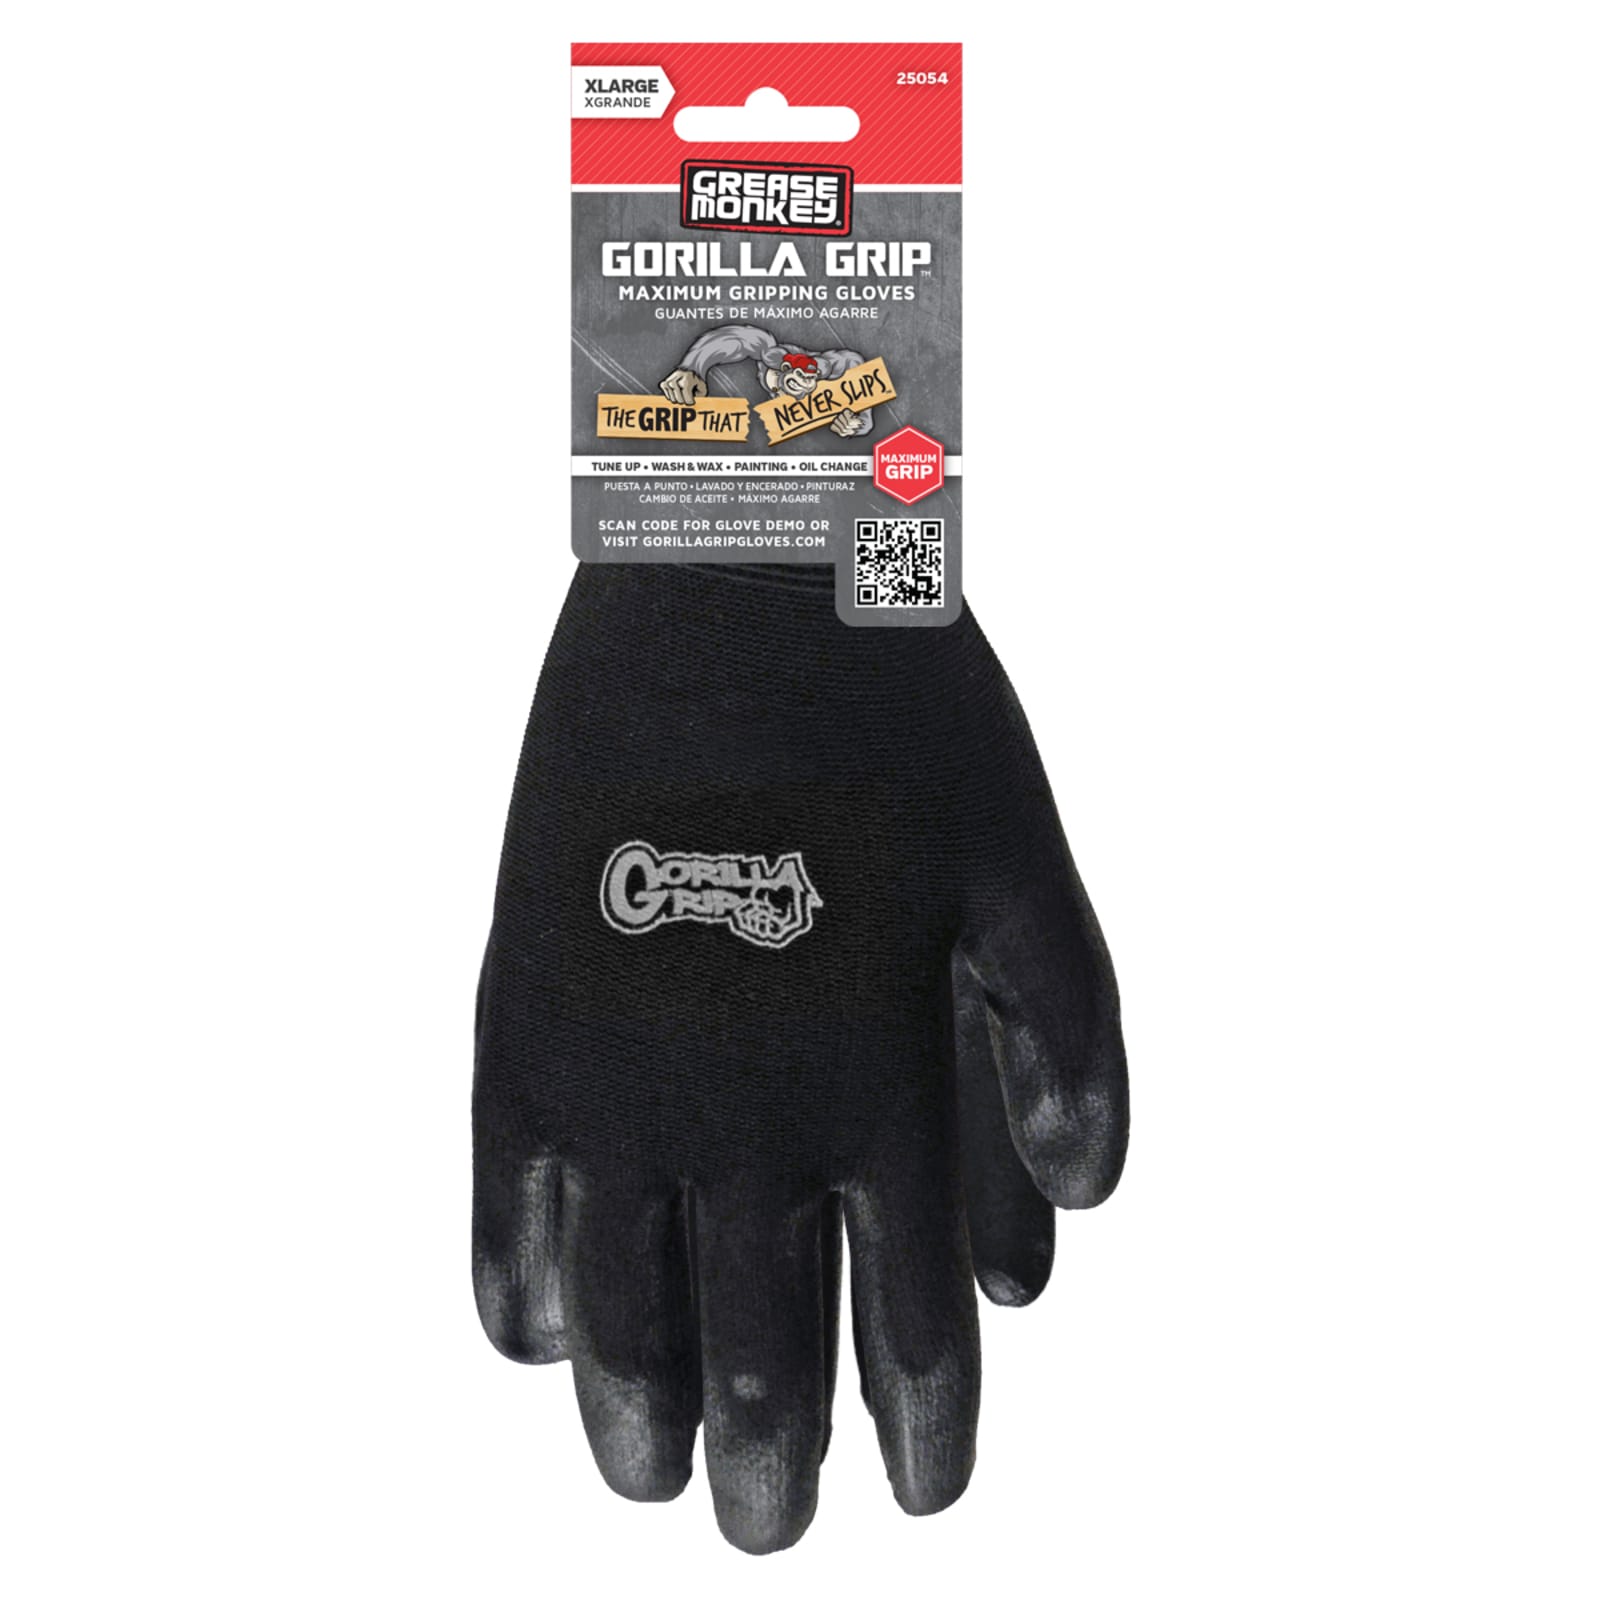 New 2 PACK Grease Monkey Gorilla Grip Gloves Size LARGE